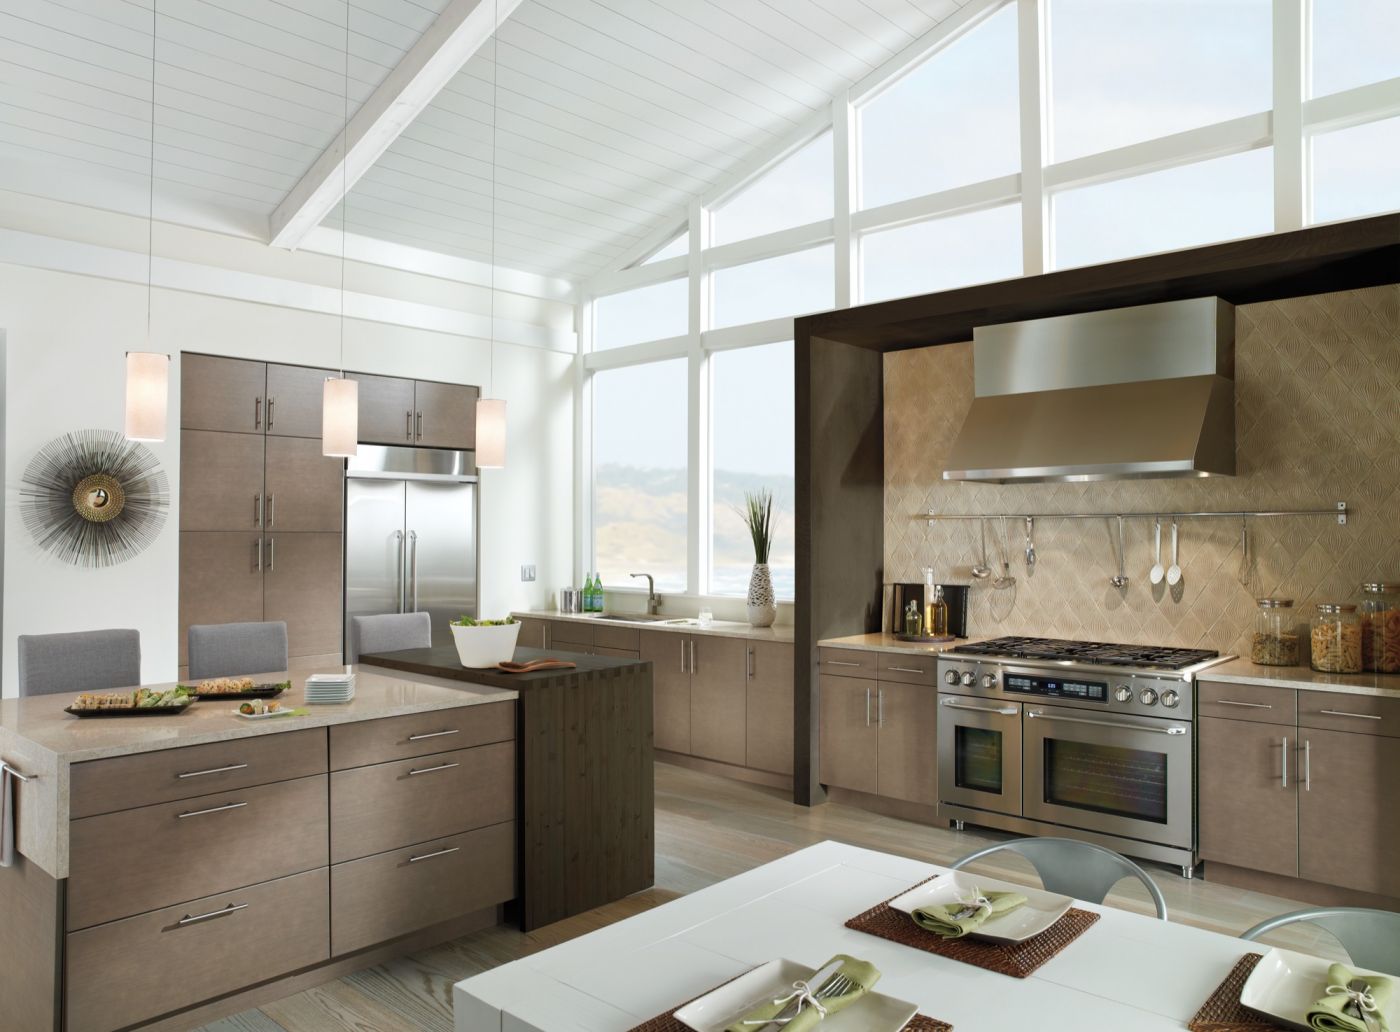 Contemporary cabinets for a kitchen that exudes class